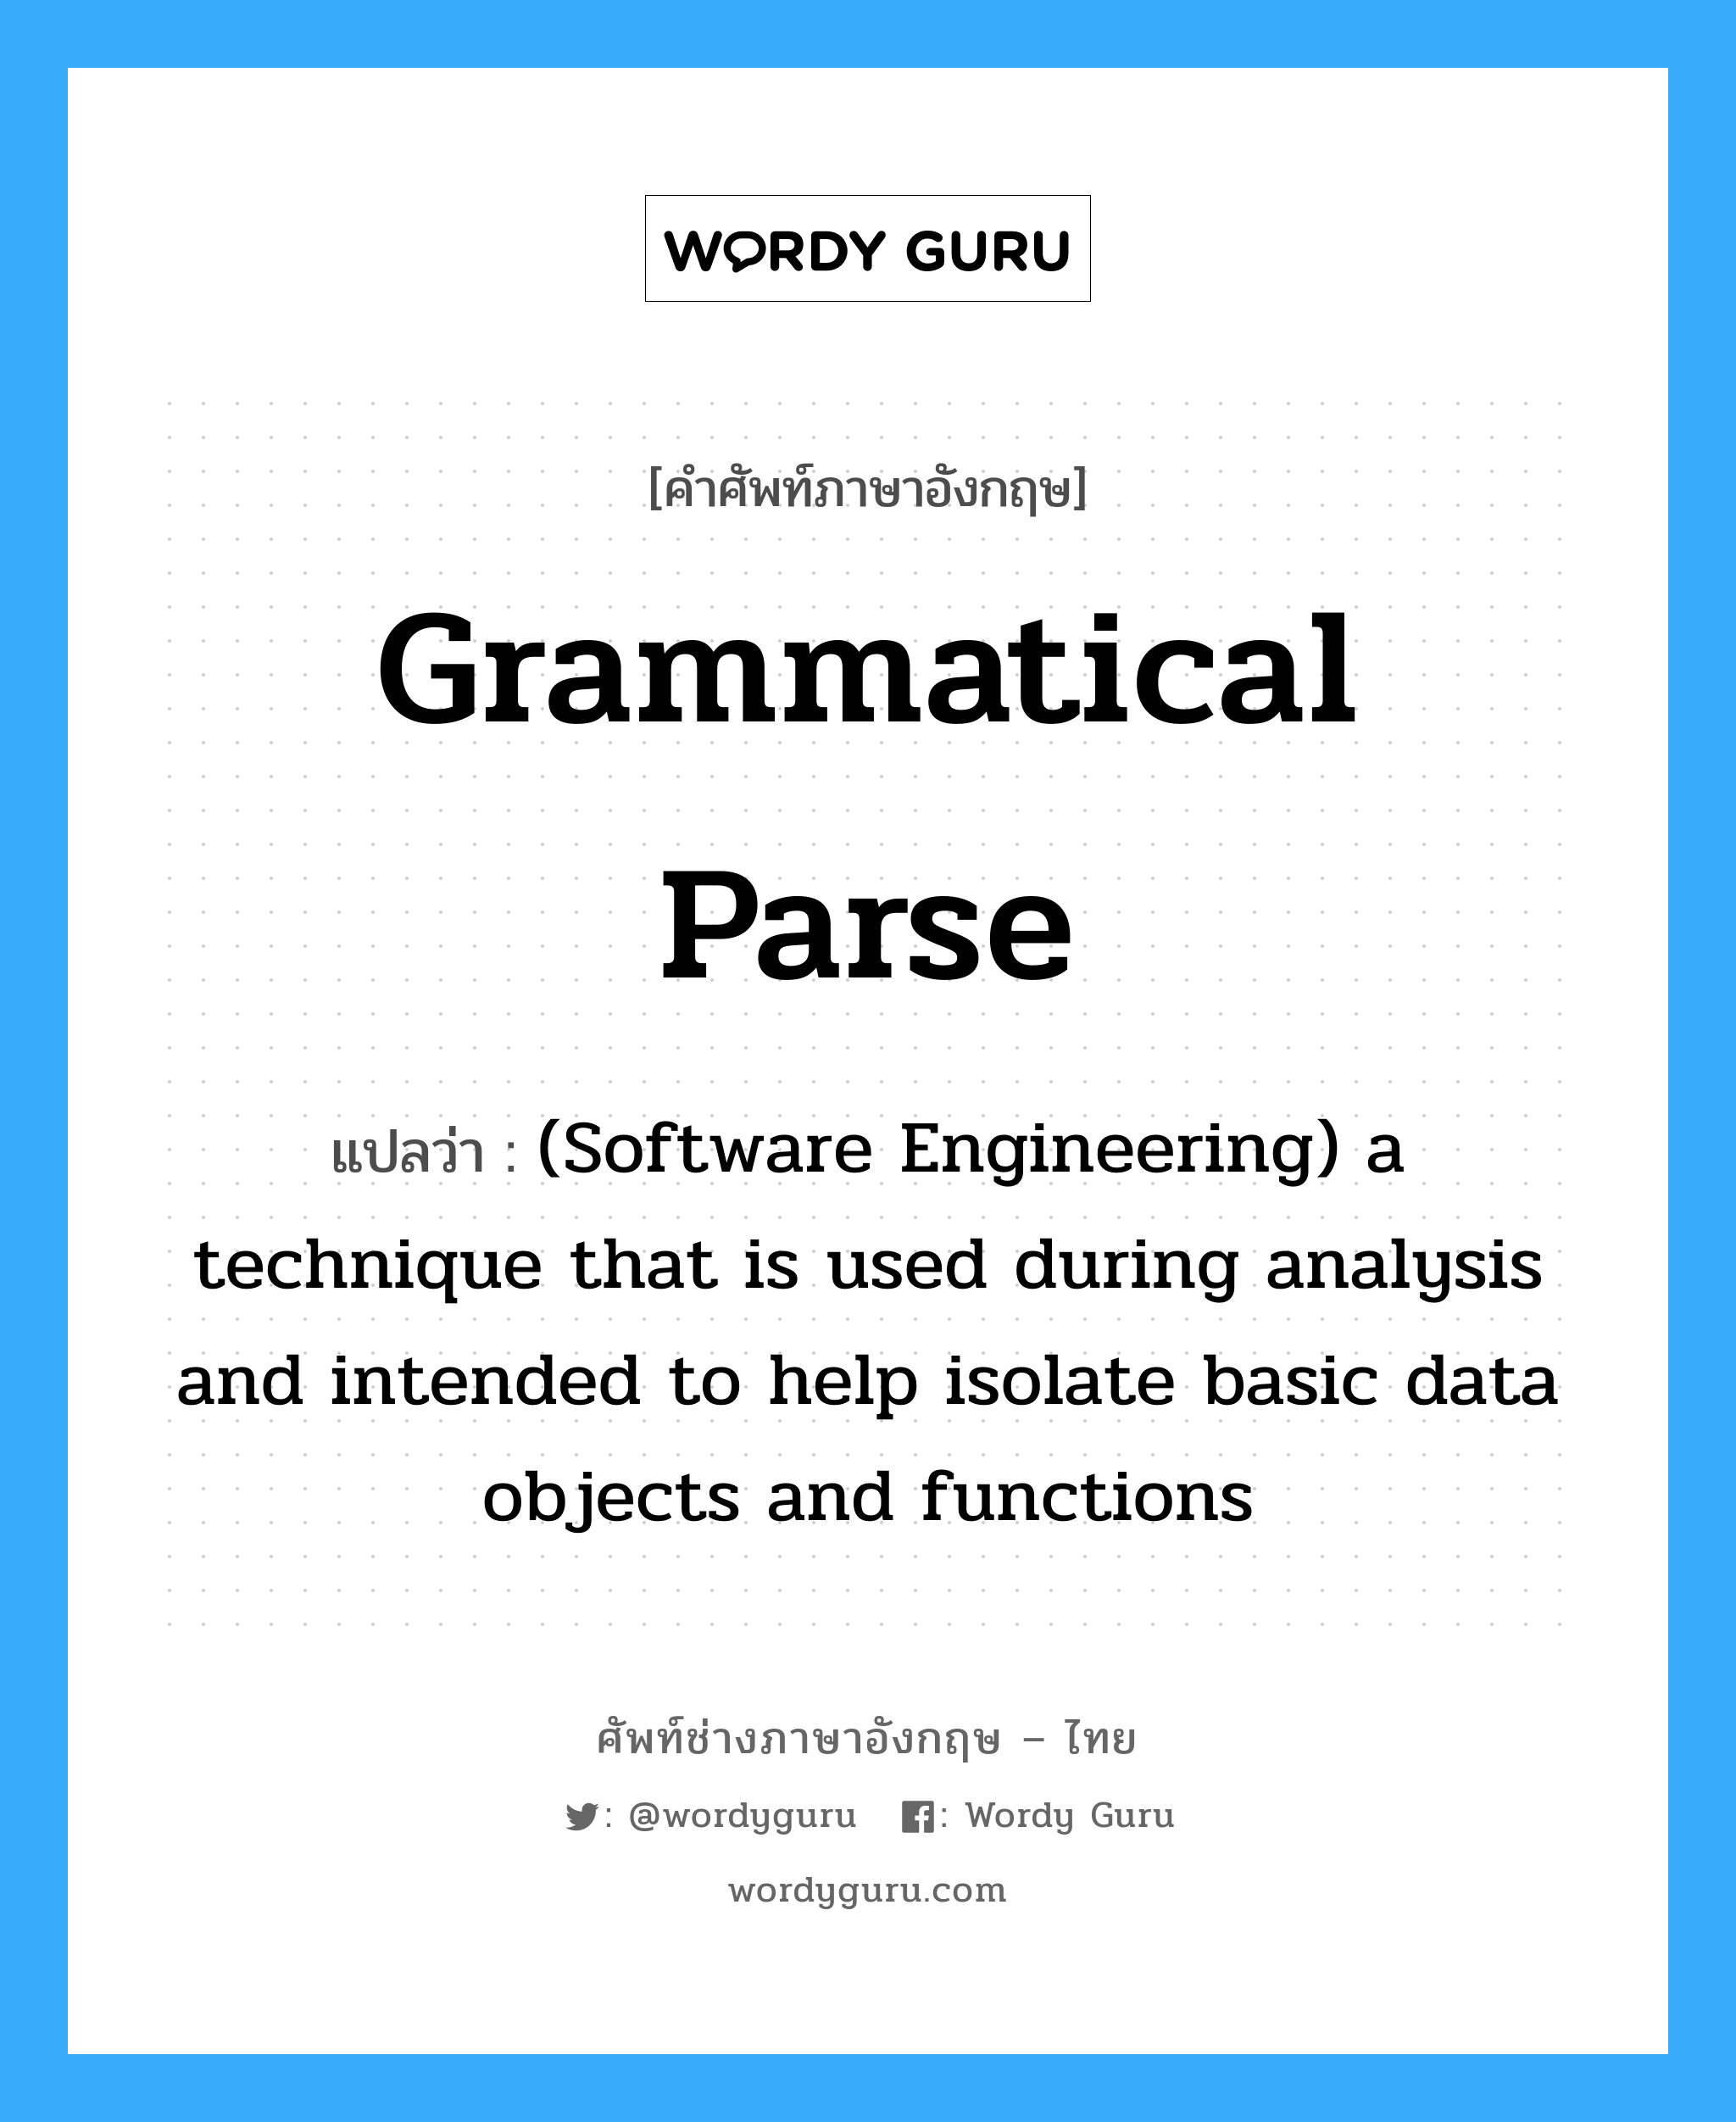 Grammatical parse แปลว่า?, คำศัพท์ช่างภาษาอังกฤษ - ไทย Grammatical parse คำศัพท์ภาษาอังกฤษ Grammatical parse แปลว่า (Software Engineering) a technique that is used during analysis and intended to help isolate basic data objects and functions